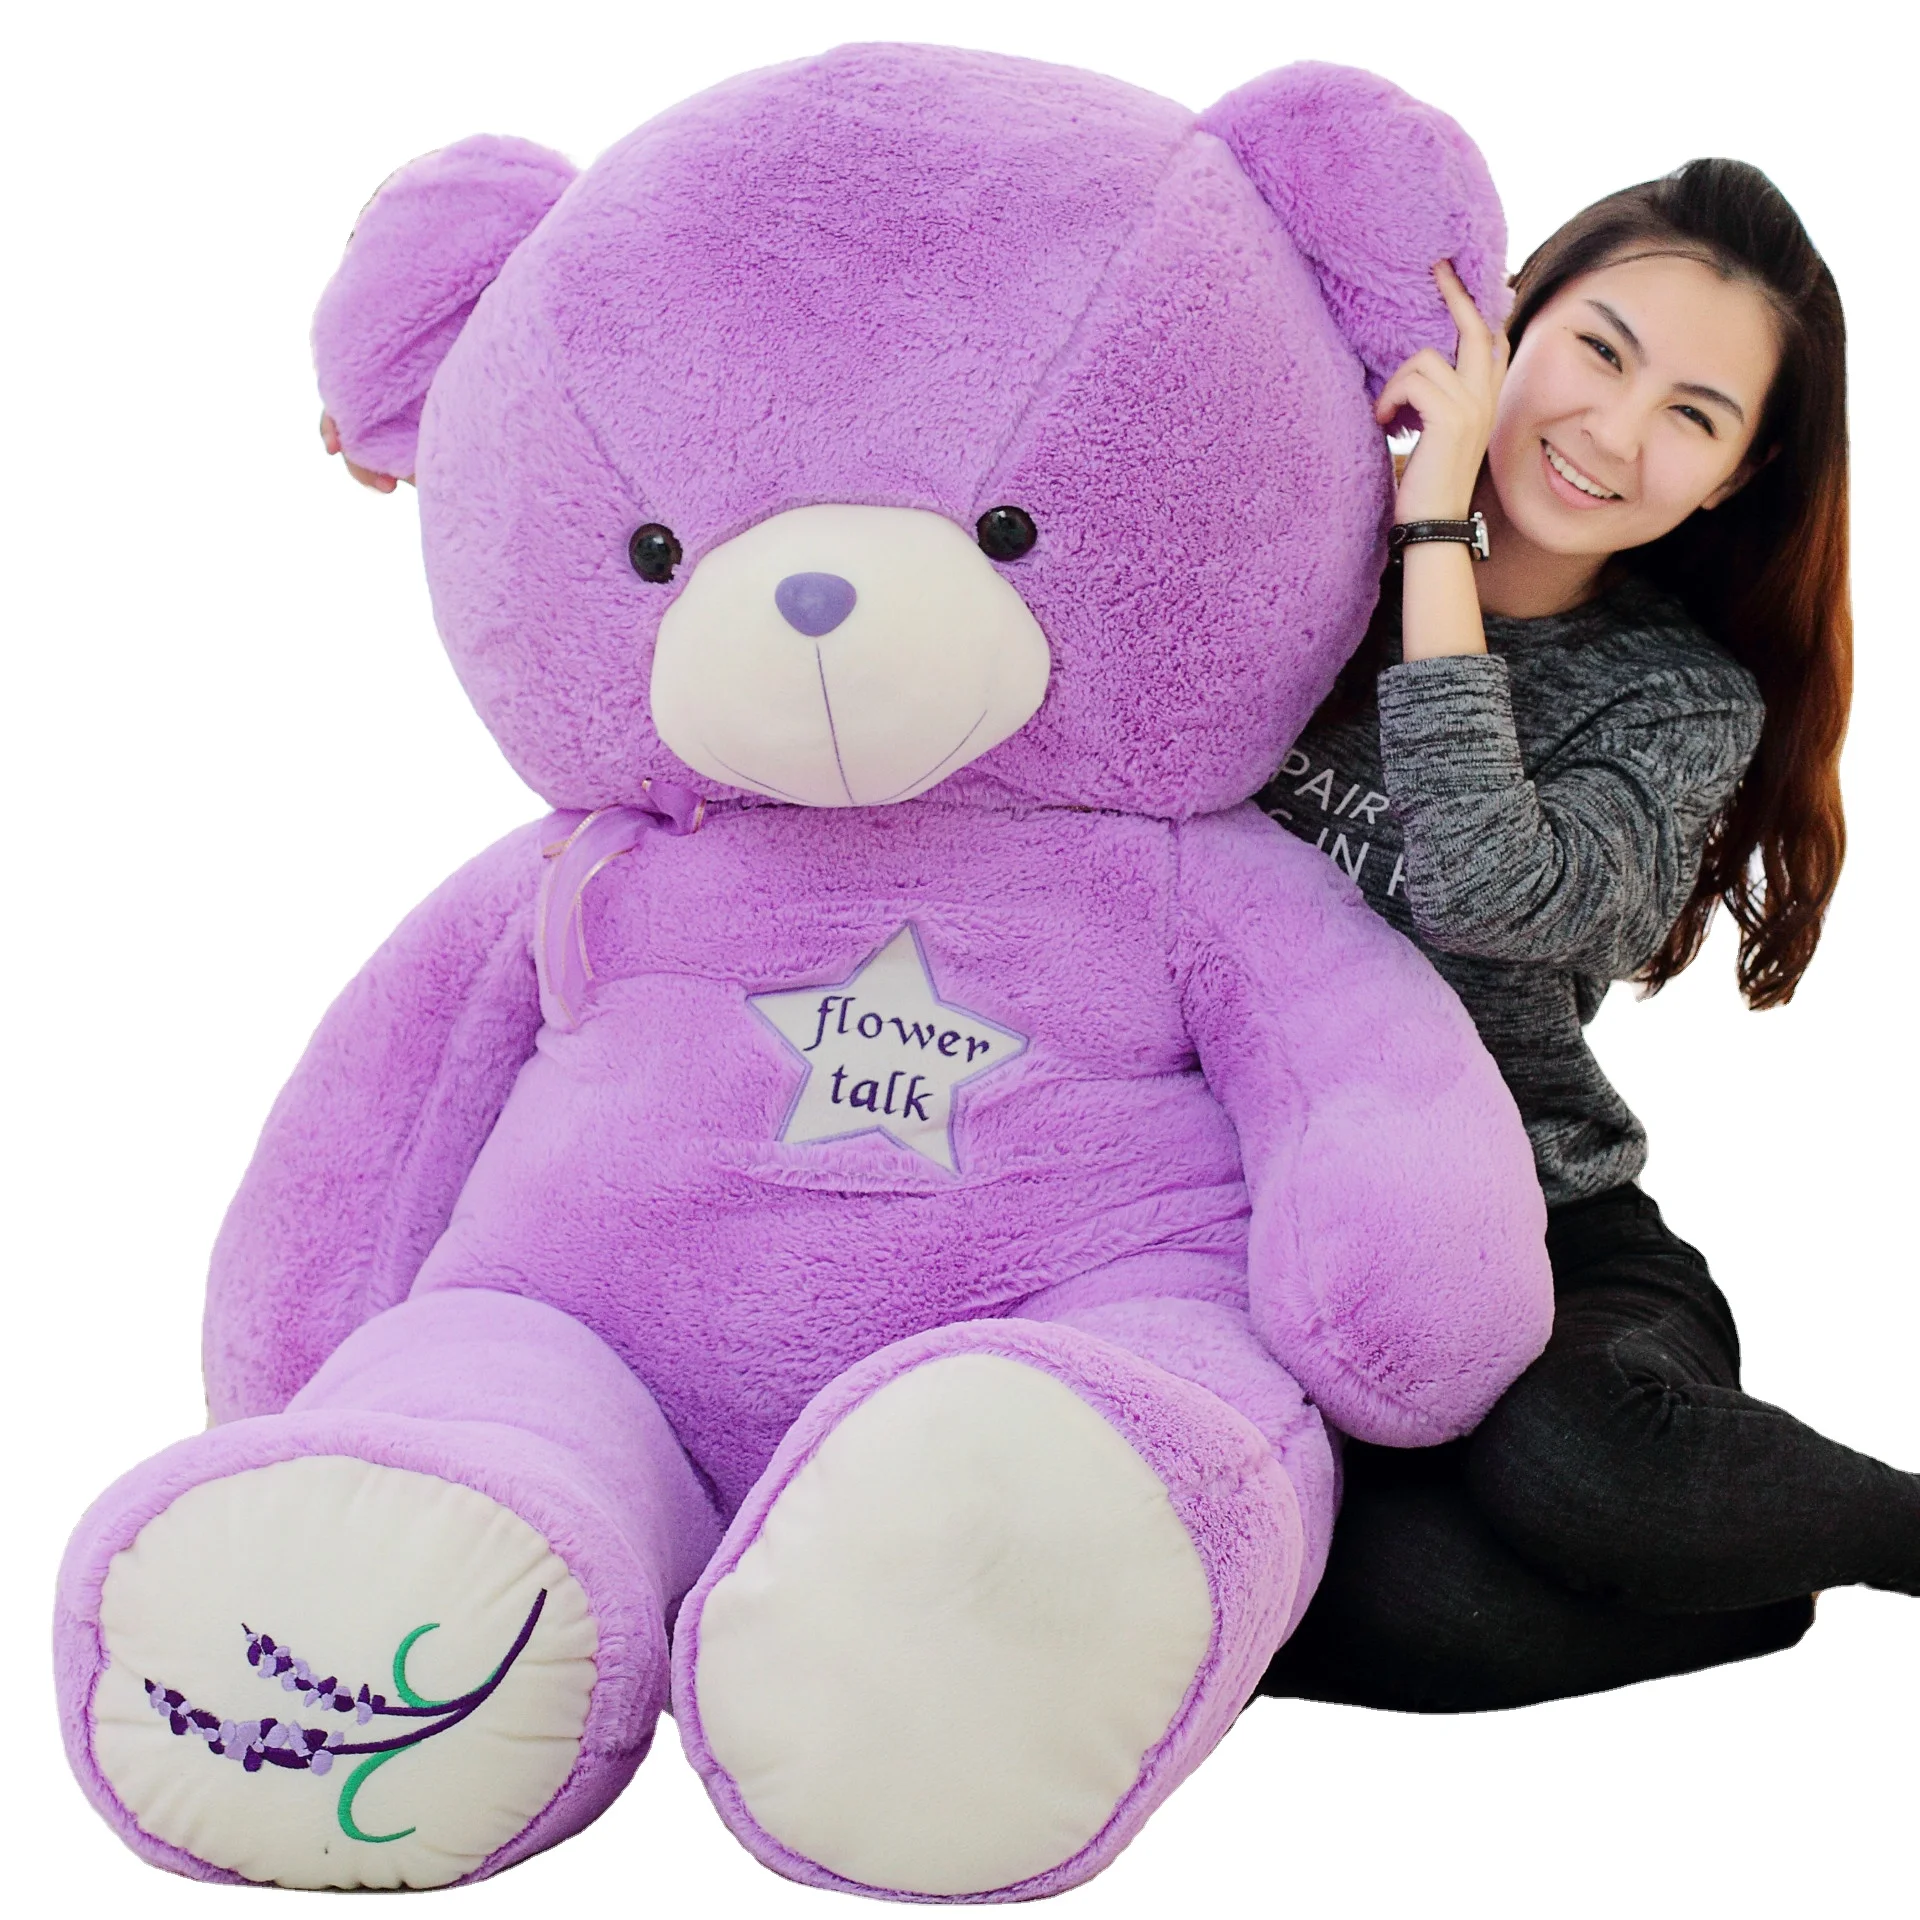 

Lovely plush purple lavender oversized teddy bear cuddle bear stuffed toy for Christmas and girls' gifts